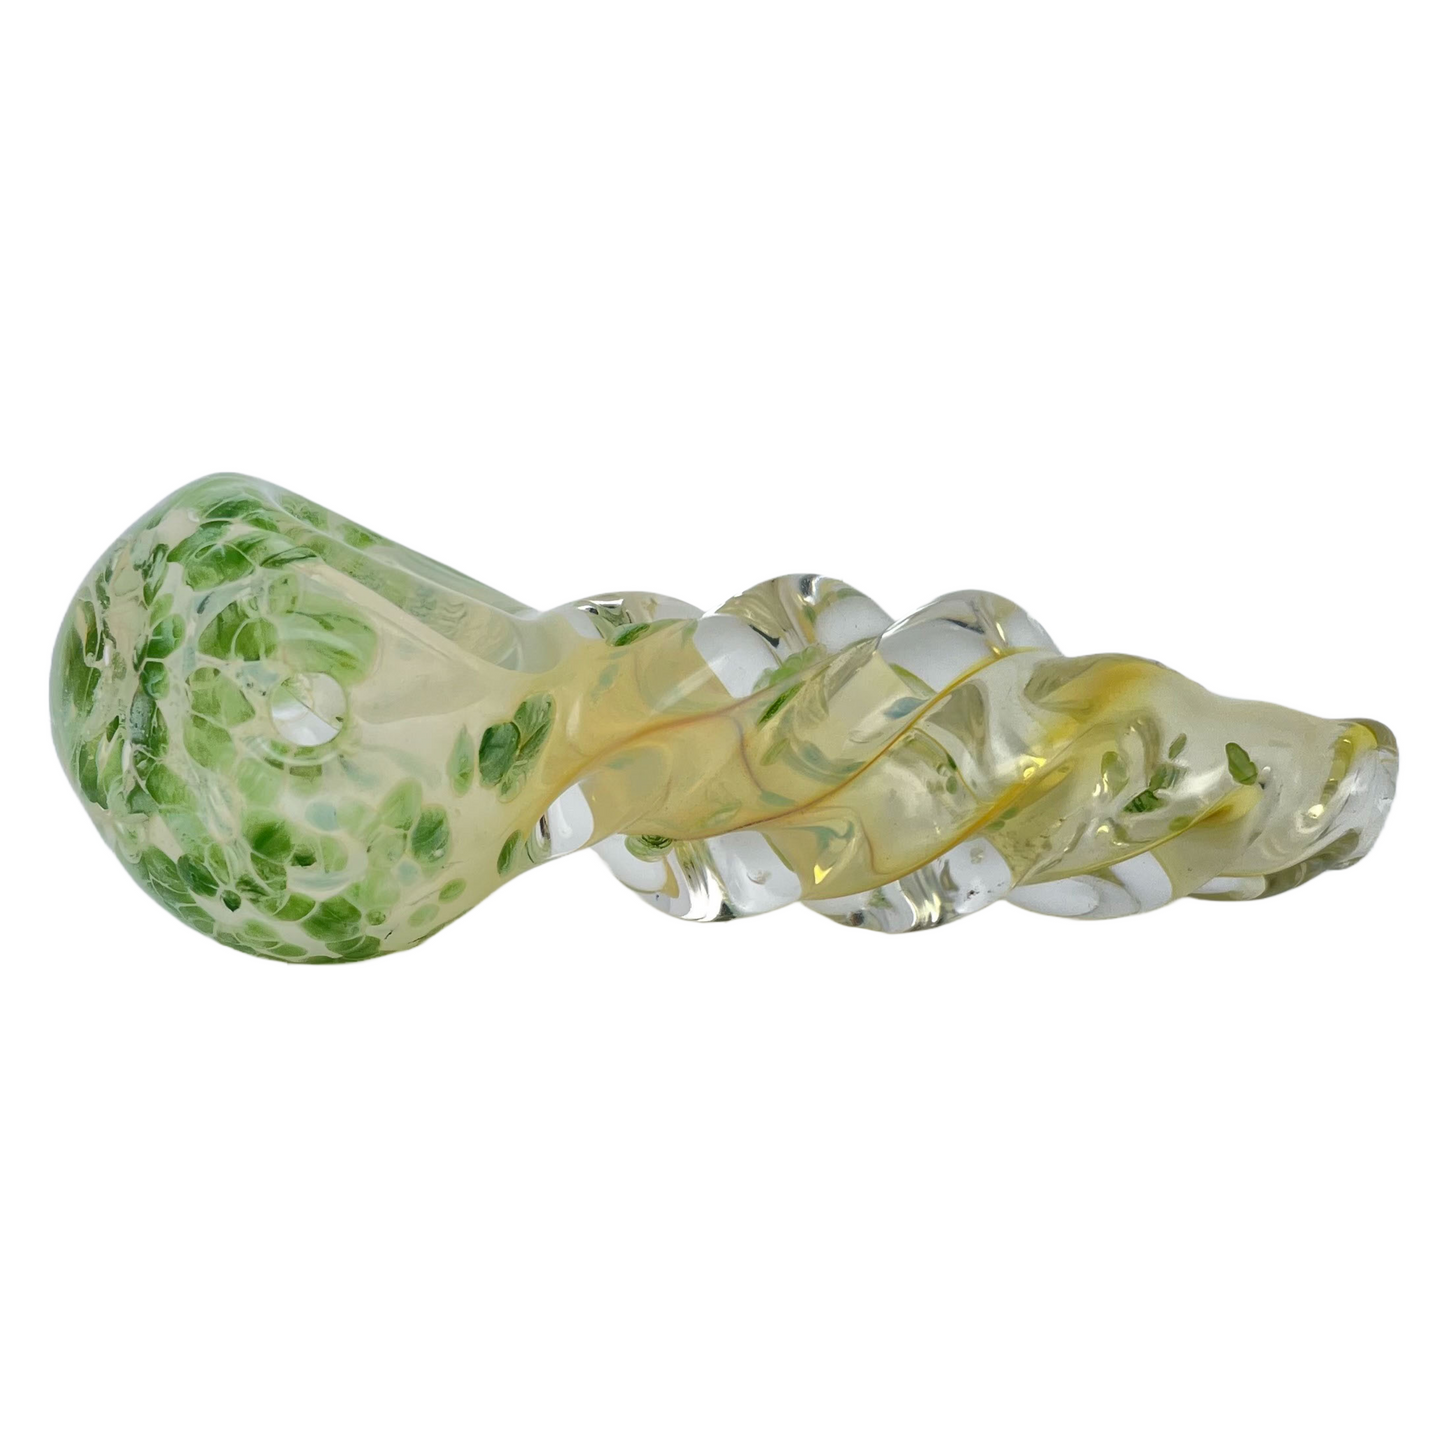 3.5" Frit Spiral Spoon Pipe